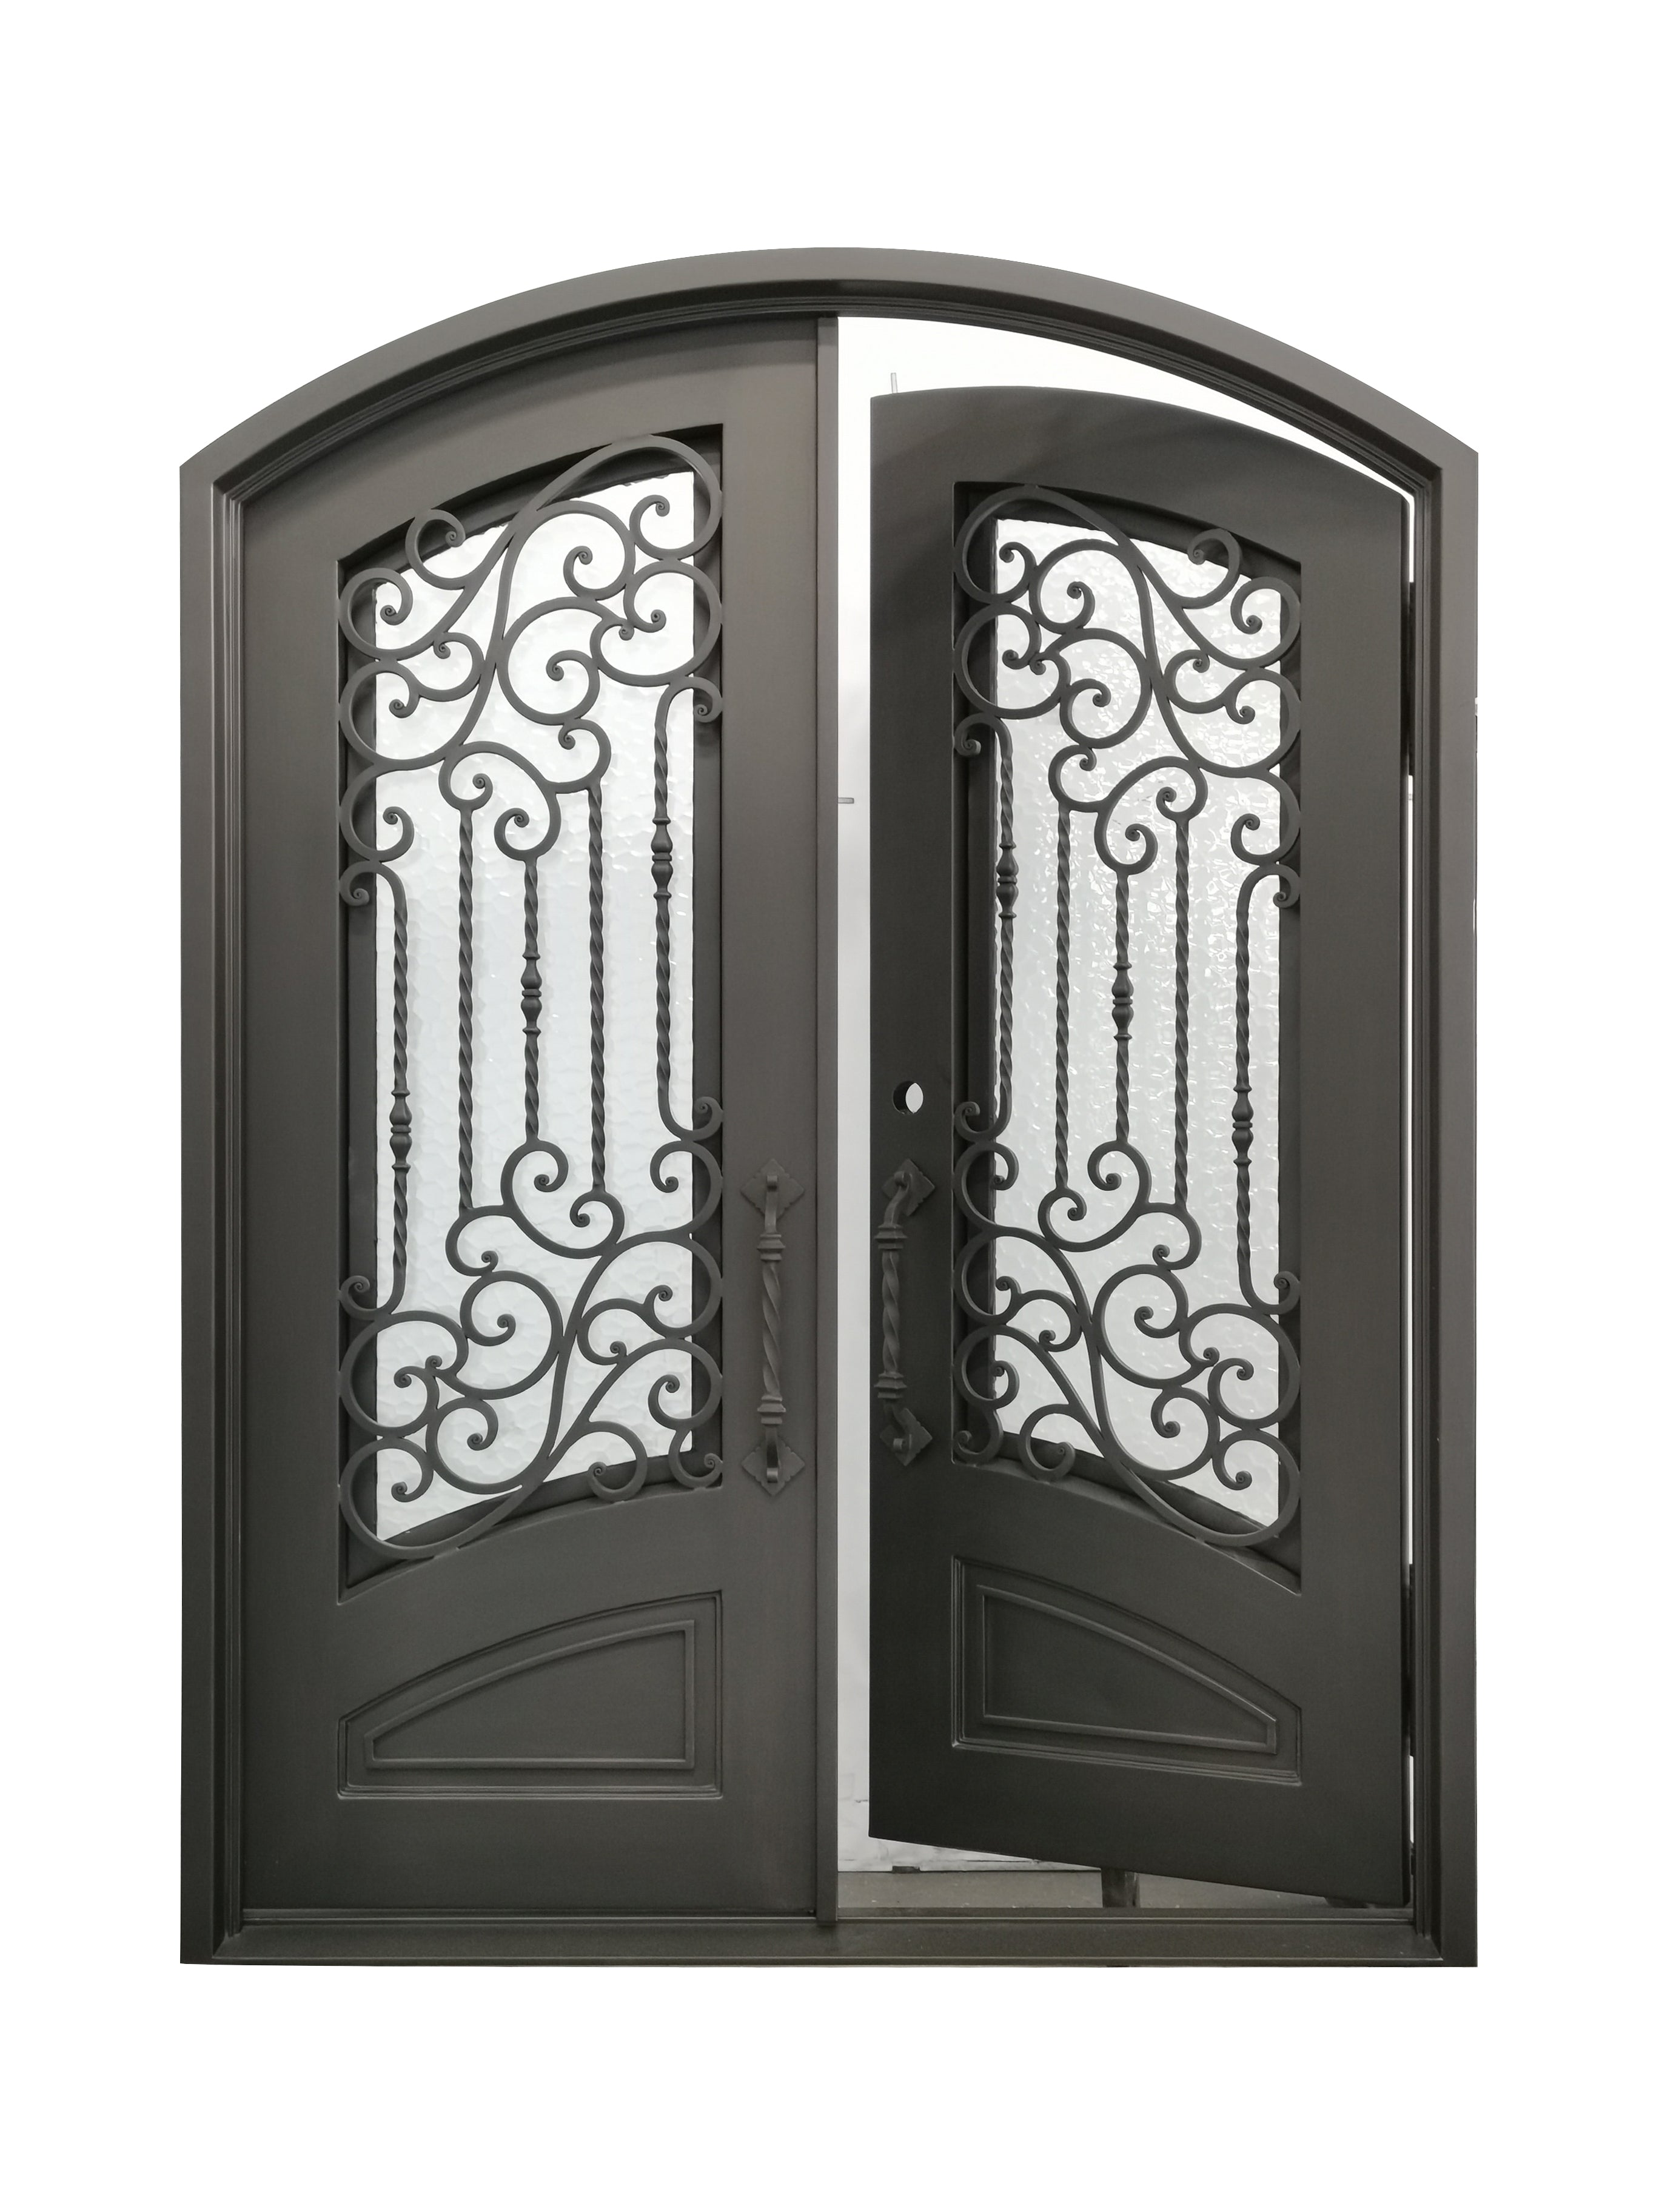 Archer Model Double Front Entry Iron Door With Tempered Water Cubit Glass Dark Bronze Finish - AAWAIZ IMPORTS